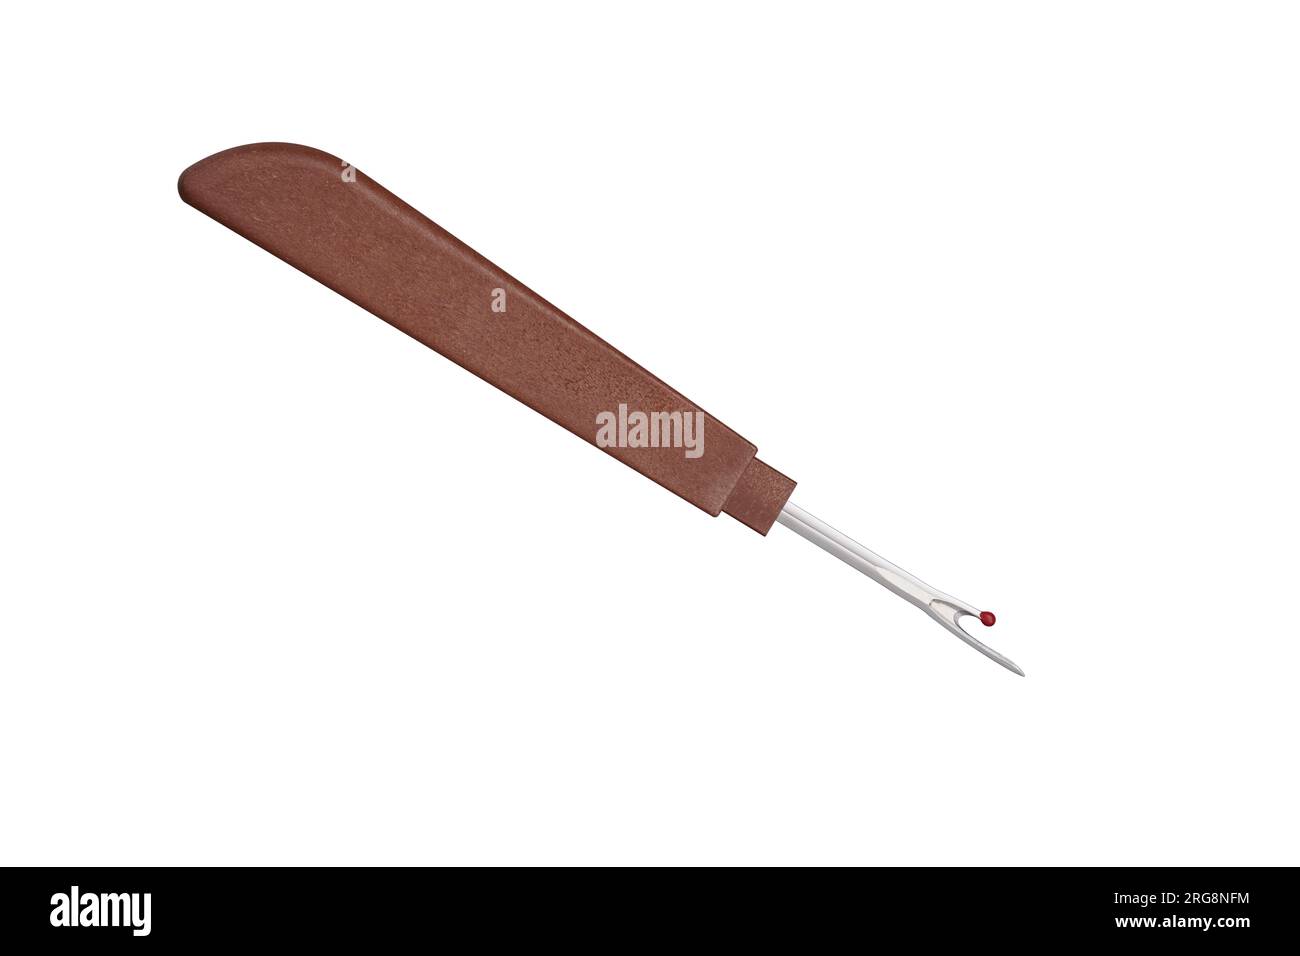 Seam ripper with brown plastic handle, cut out Stock Photo